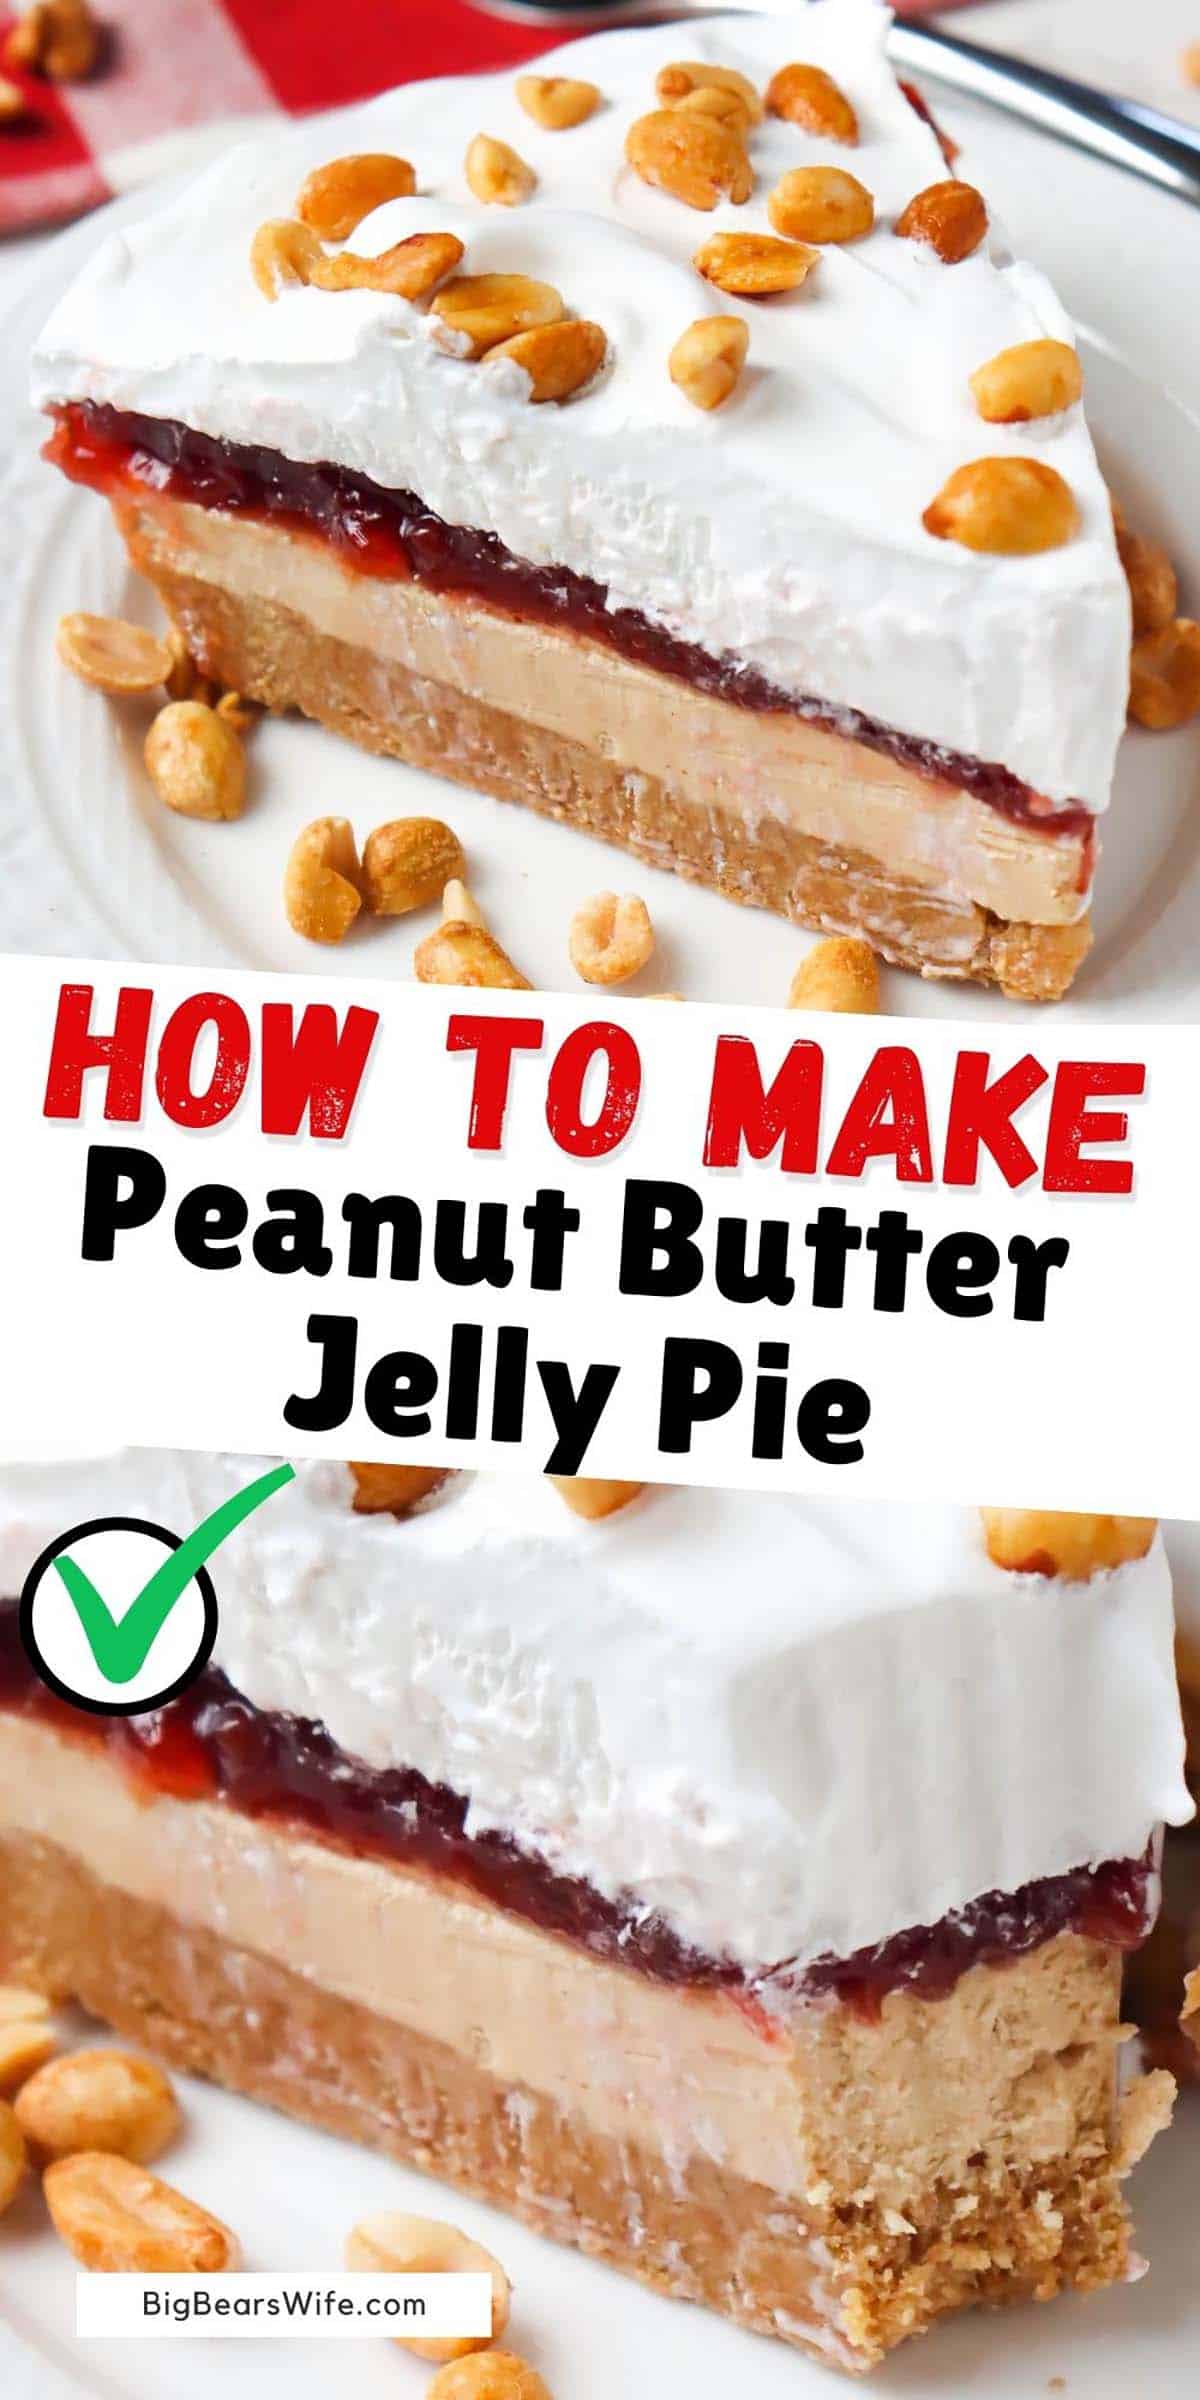 We’ve got a peanut butter and jelly sandwich in pie form! This Peanut Butter Jelly Pie is a delicious frozen treat has layers of peanut butter cookies, peanut butter filling, strawberry jelly and whipped topping! This pie is best served frozen!  via @bigbearswife